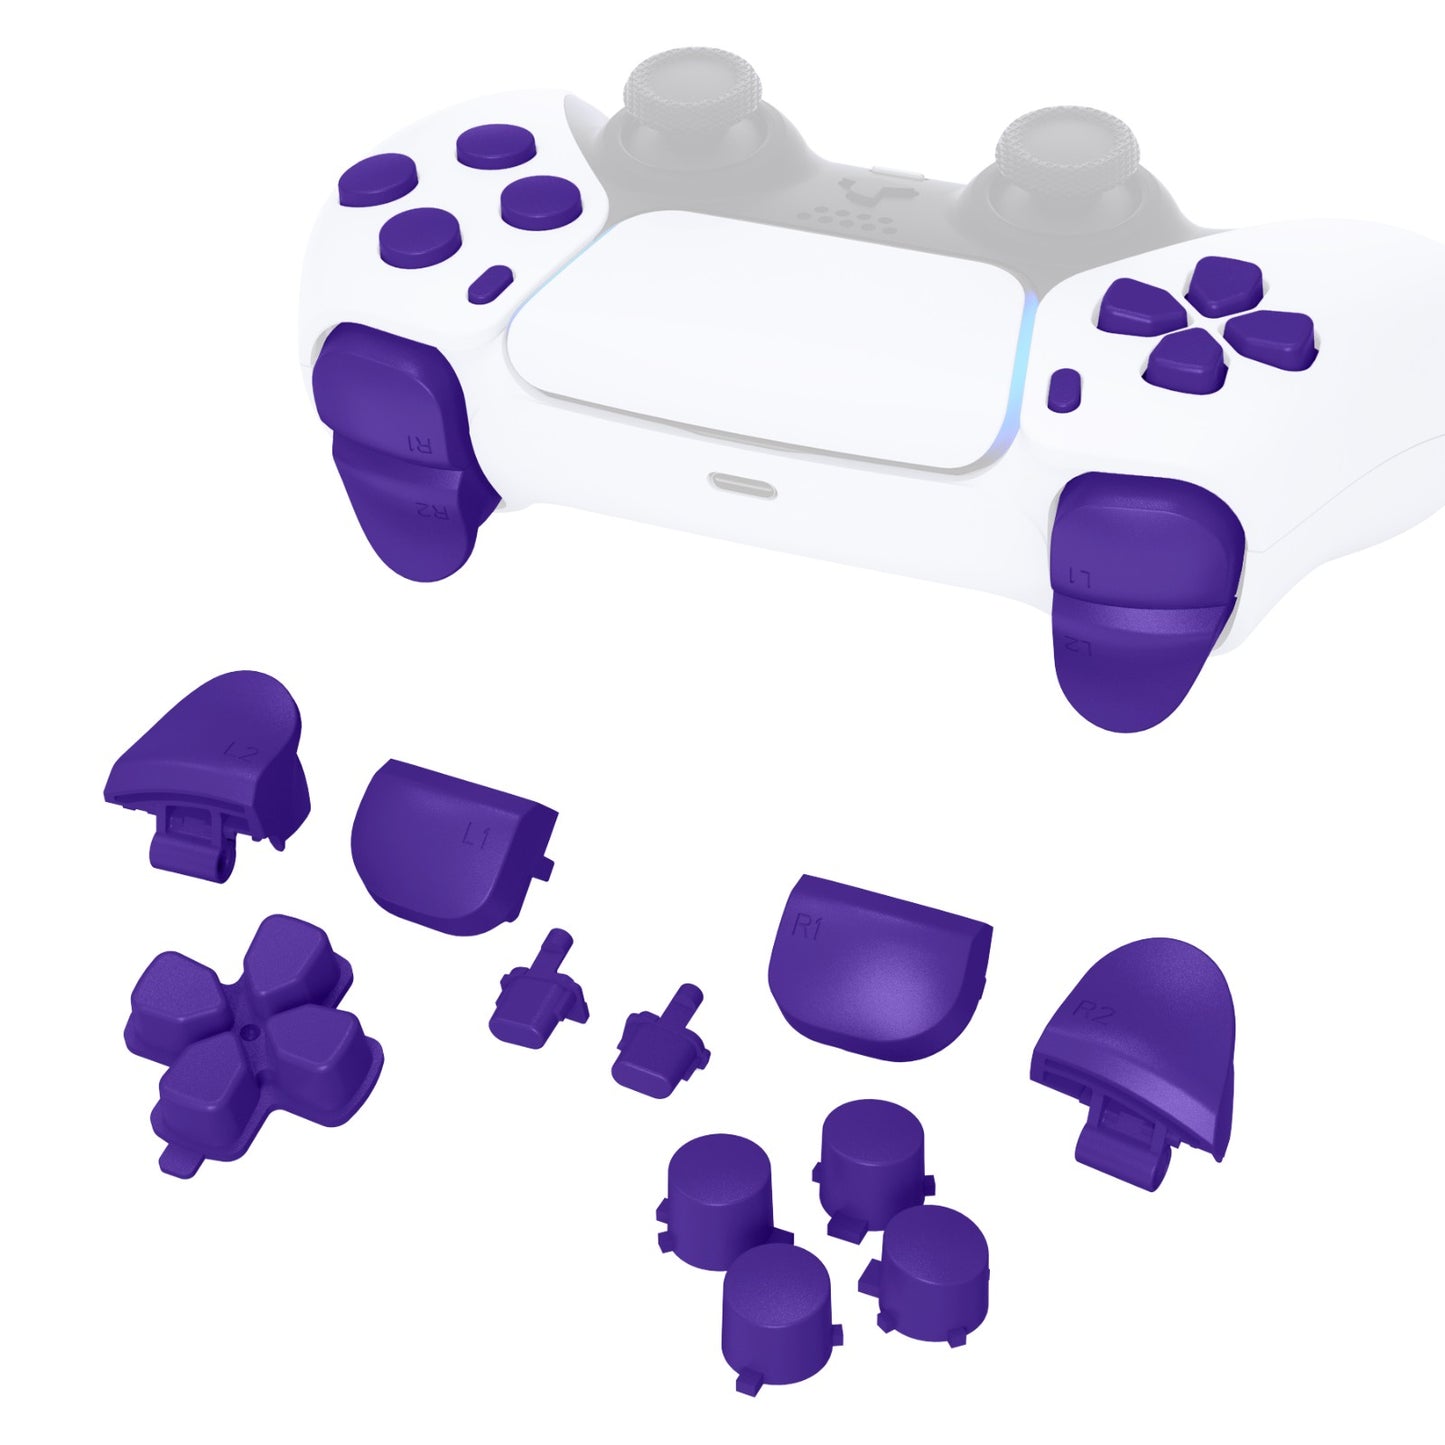 eXtremeRate Retail Replacement D-pad R1 L1 R2 L2 Triggers Share Options Face Buttons, Purple Full Set Buttons Compatible with ps5 Controller BDM-010 & BDM-020 - JPF1007G2